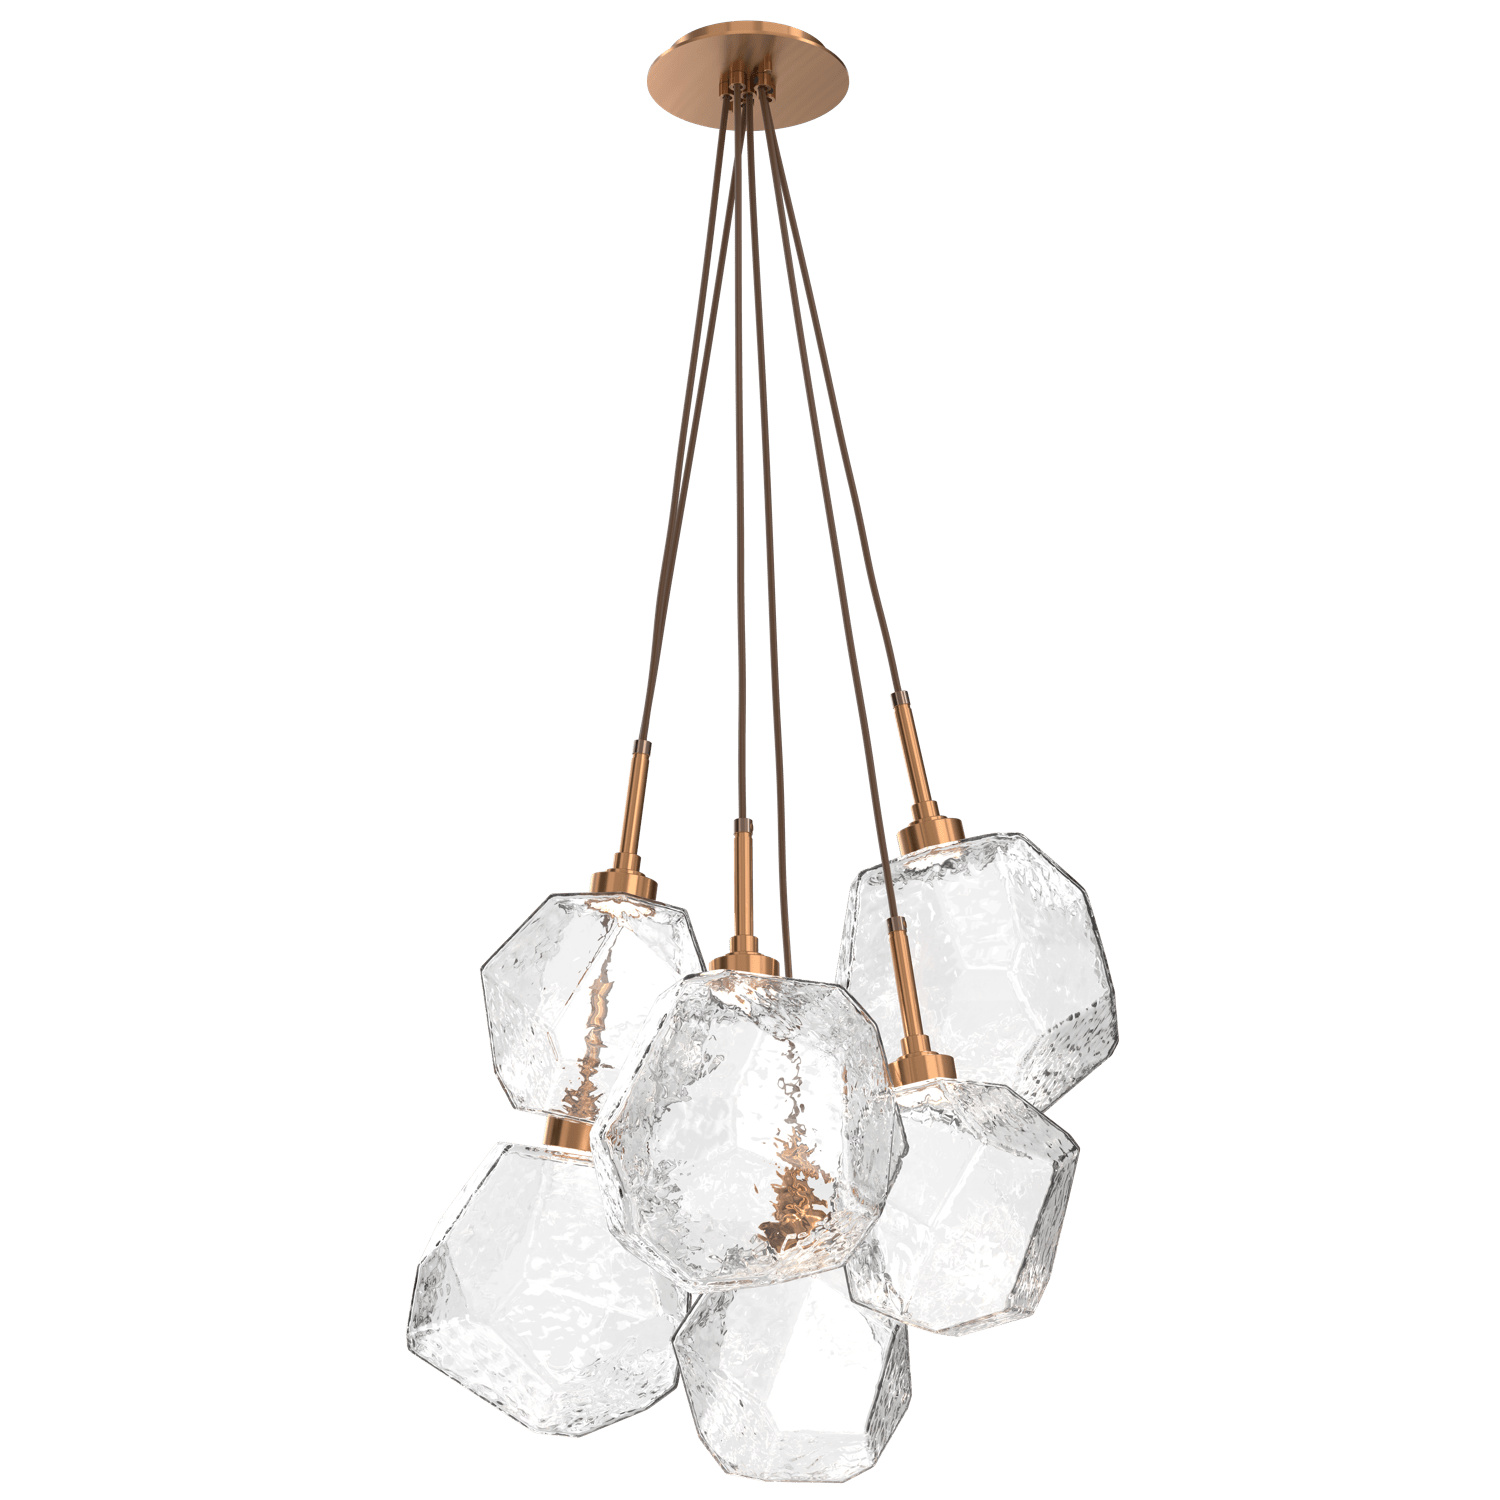 CHB0039-0F-RB-C-Hammerton-Studio-Gem-6-light-cluster-pendant-light-with-oil-rubbed-bronze-finish-and-clear-blown-glass-shades-and-LED-lamping